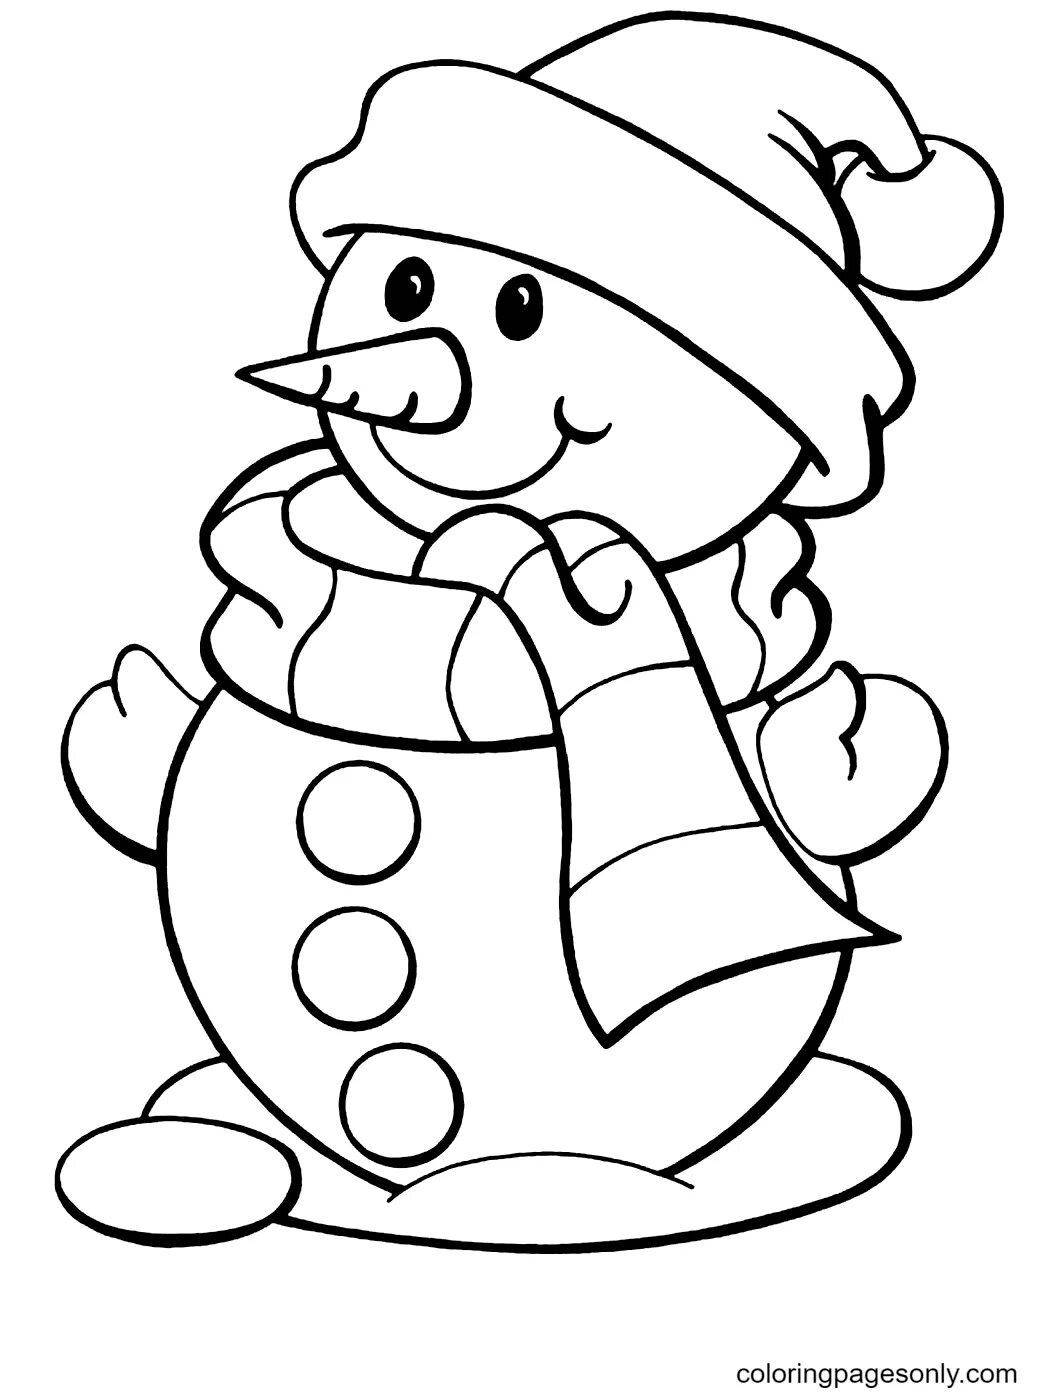 Snowman for children 2 3 years old #2